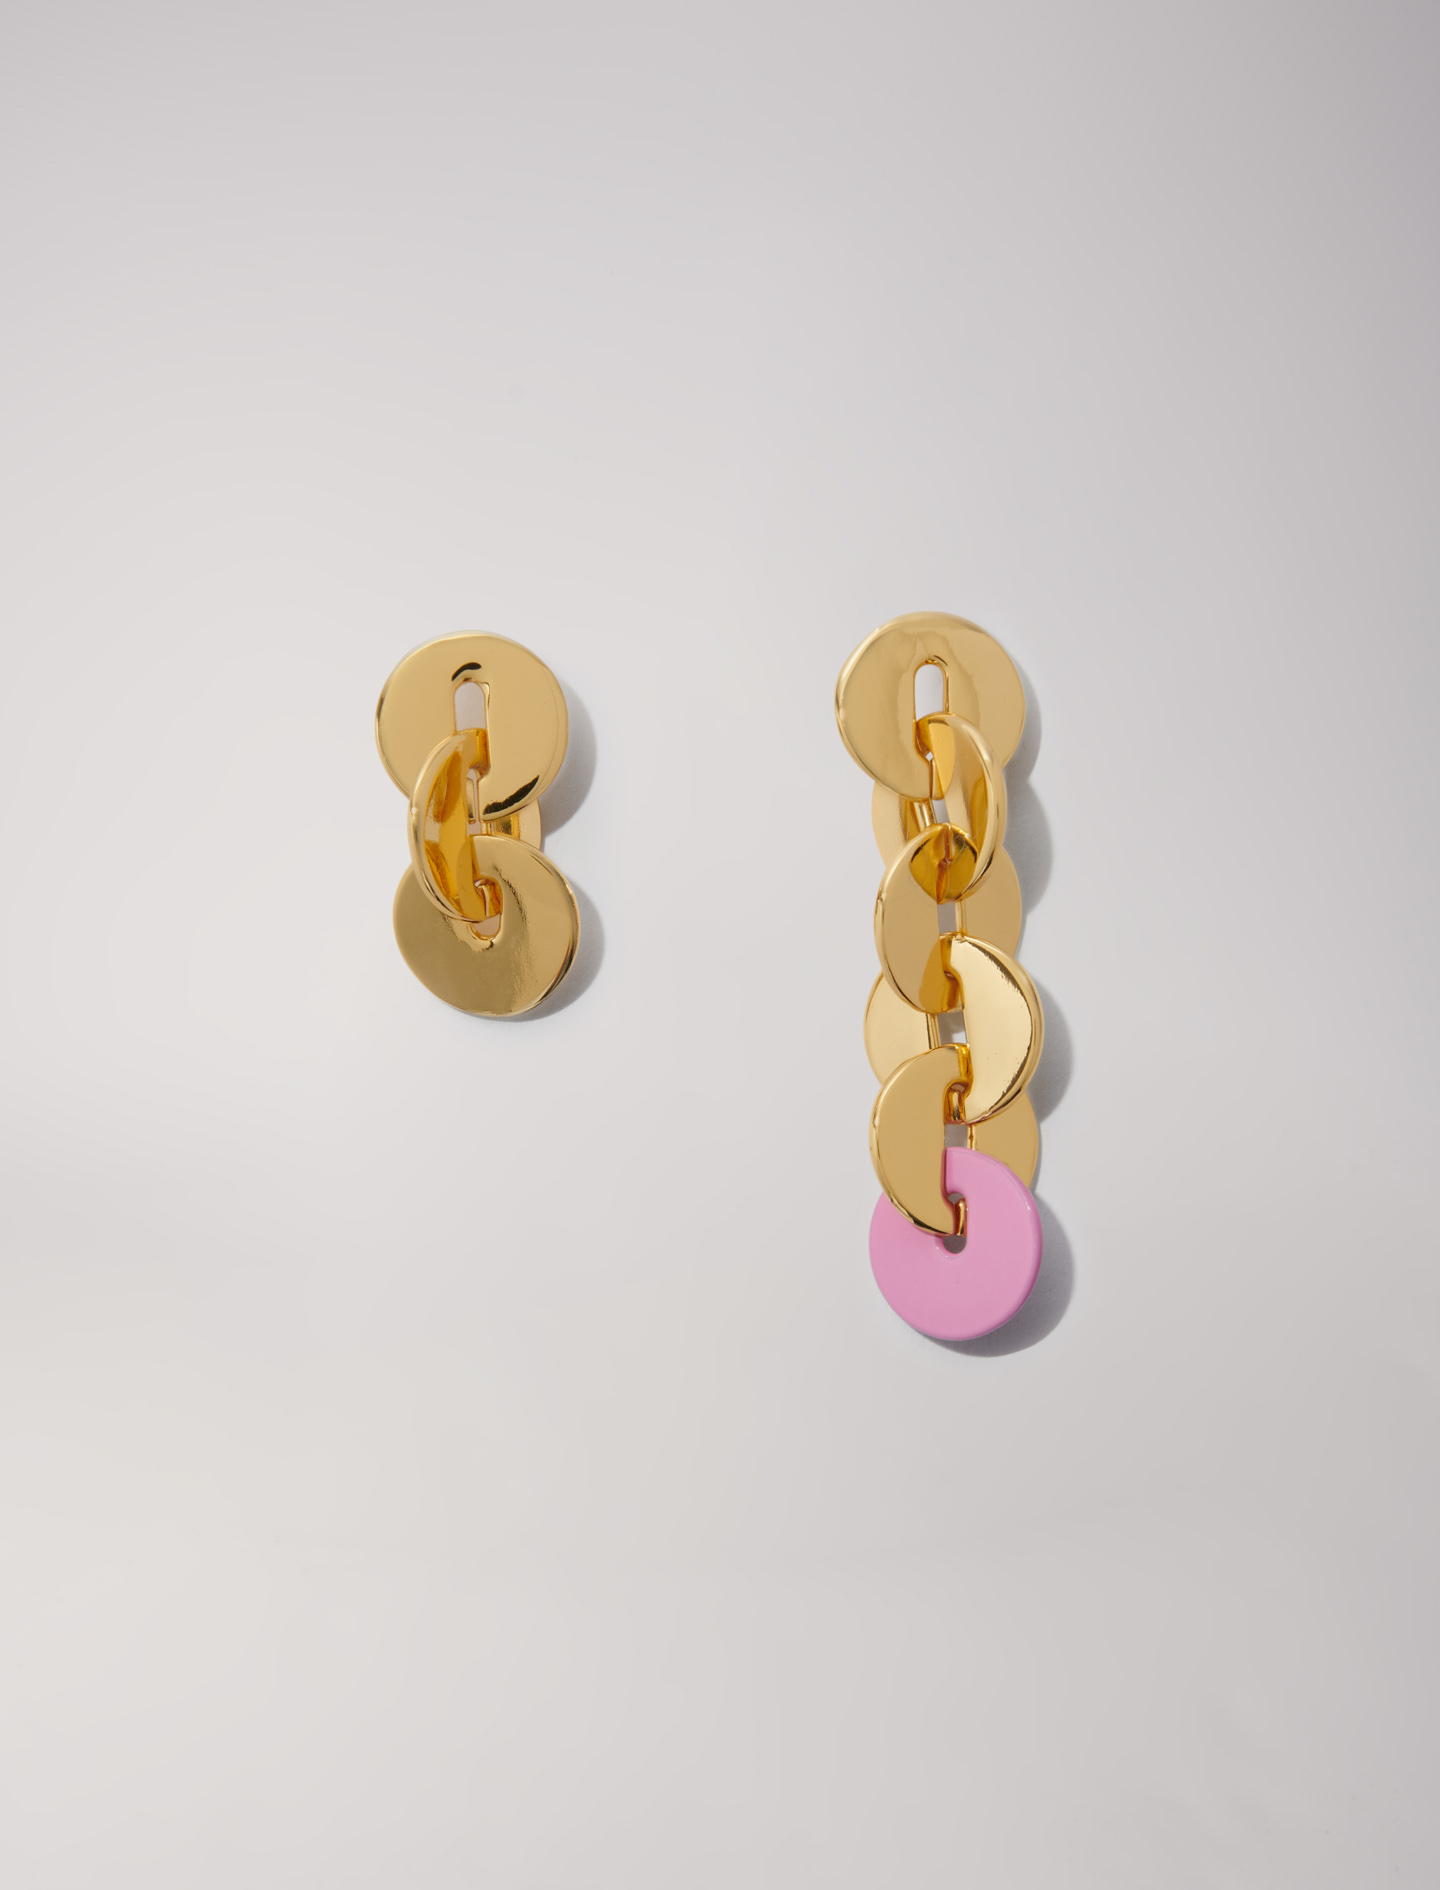 Woman's resin Jewellery: Enameled earrings for Spring/Summer, size Woman-Jewelry-OS (ONE SIZE), in color Gold / Yellow